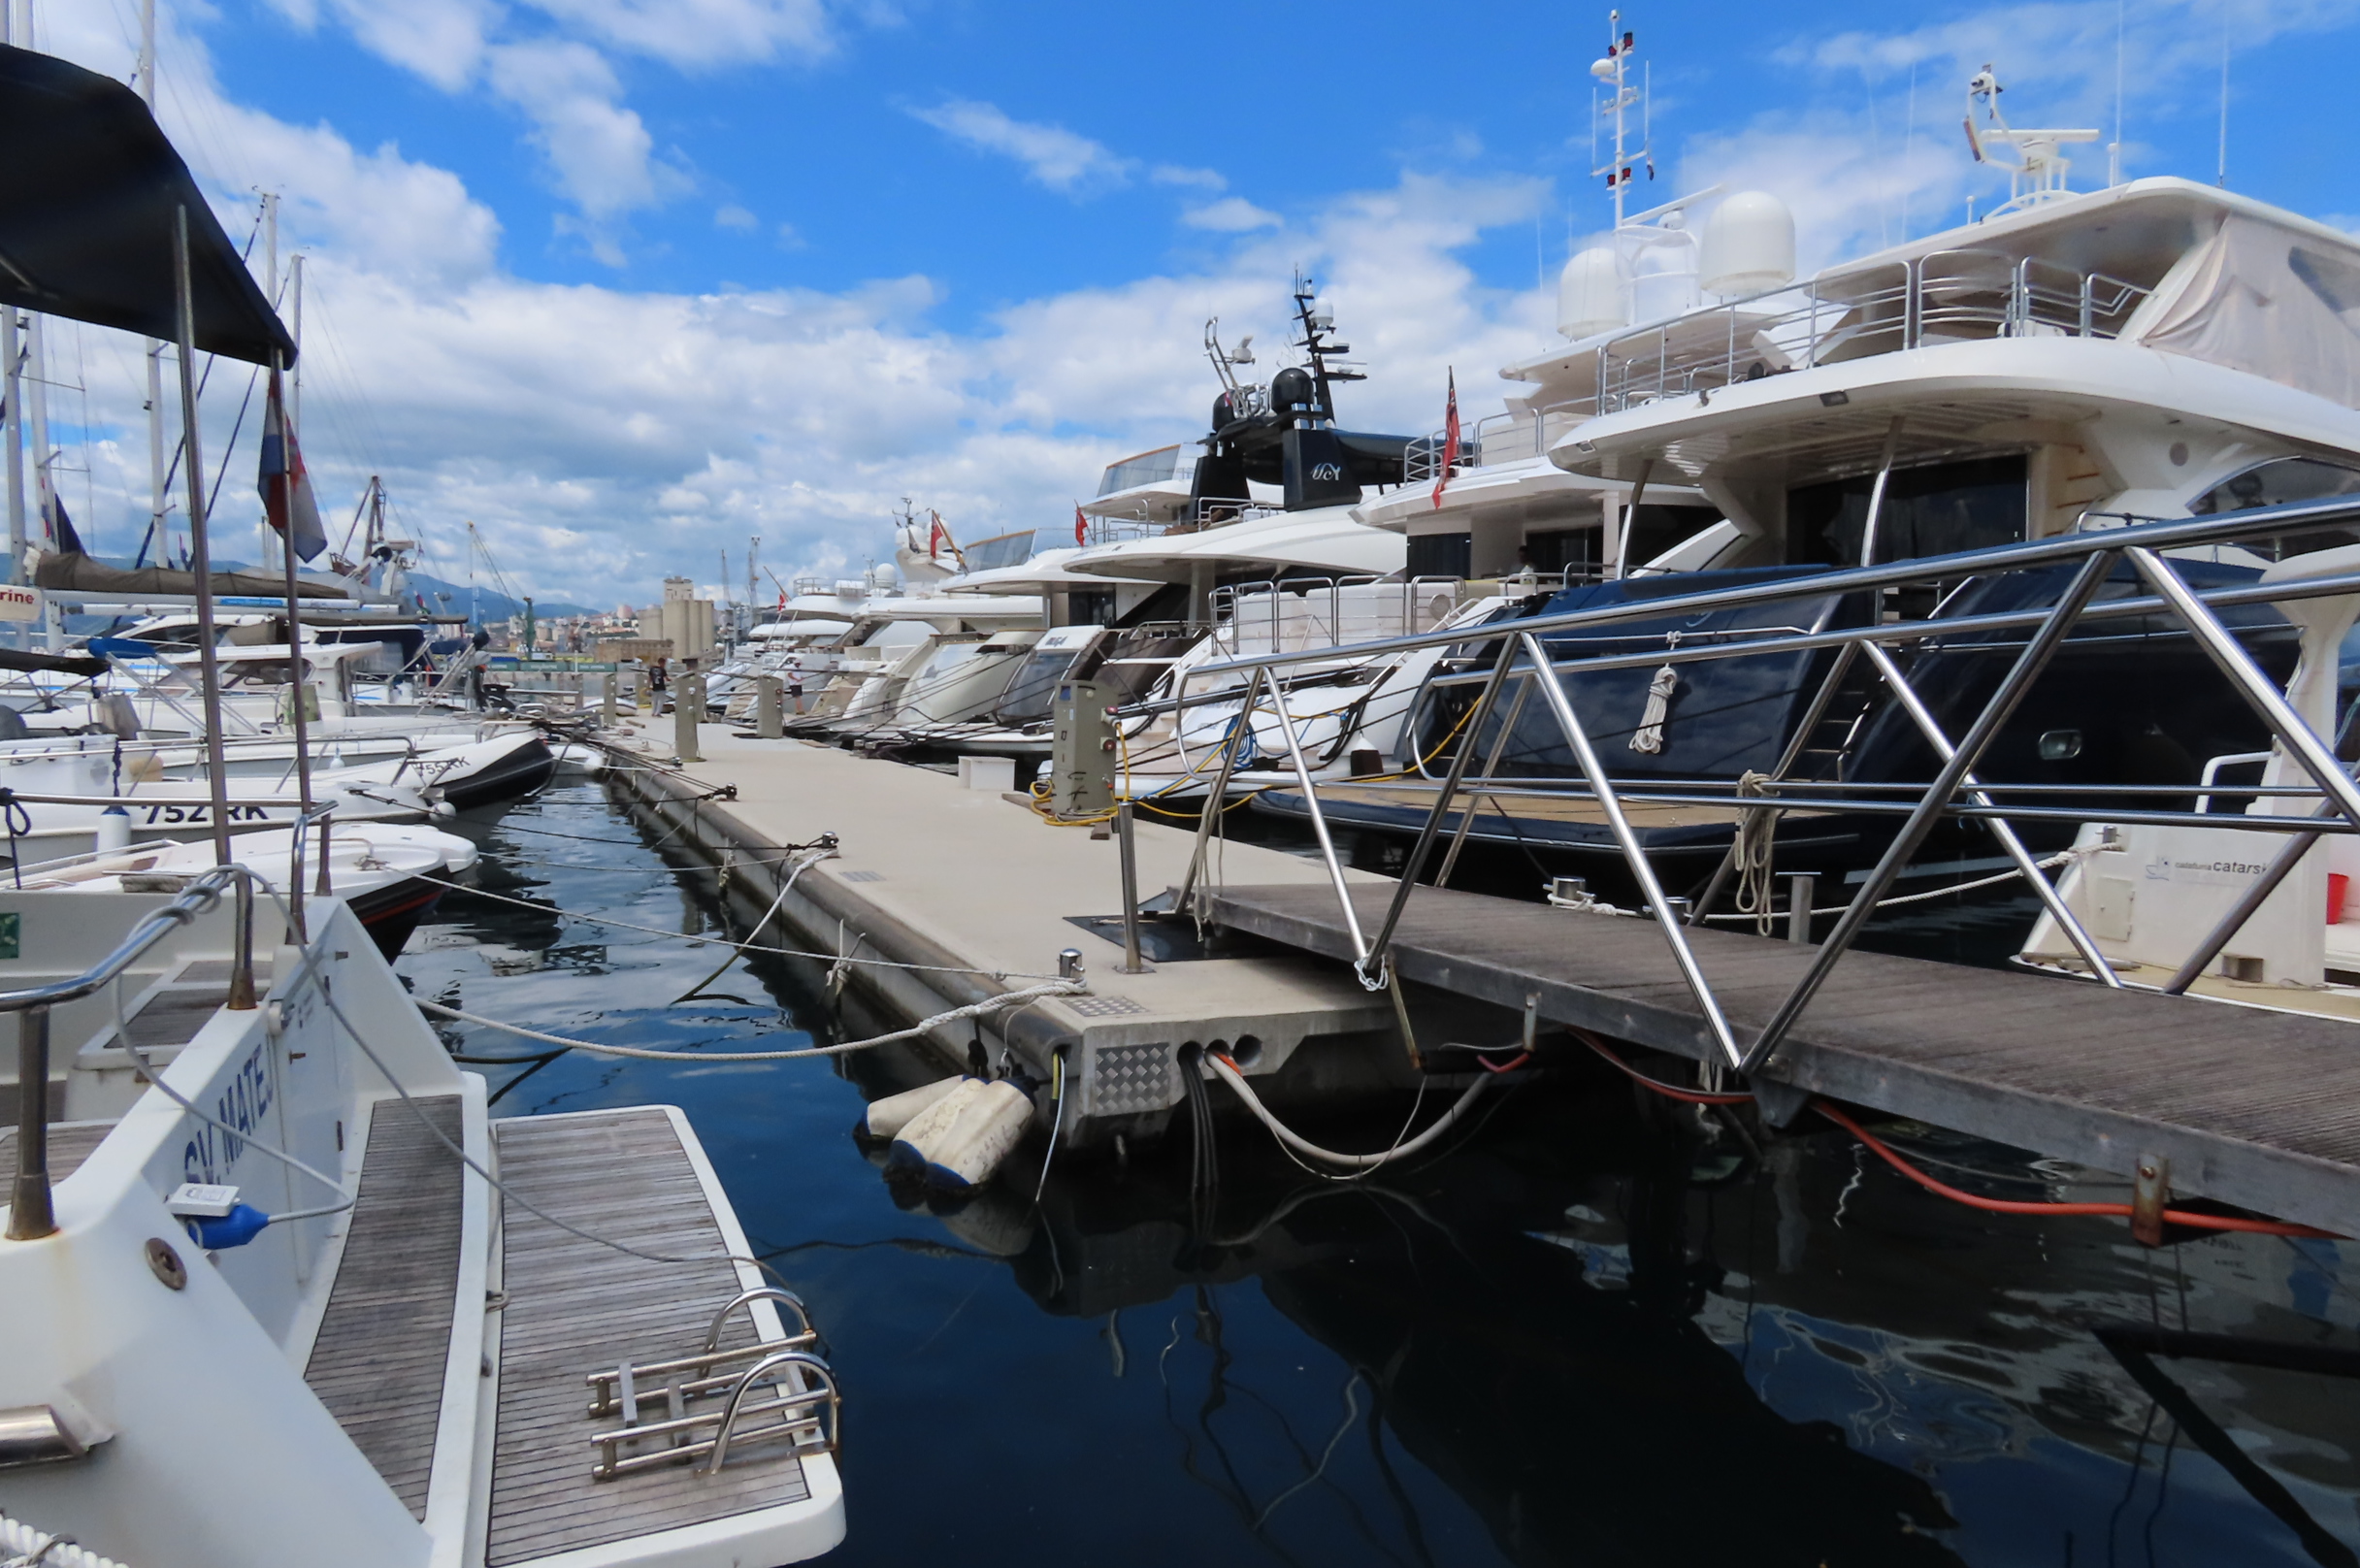 Passenger port hits record in arrival of luxury yachts